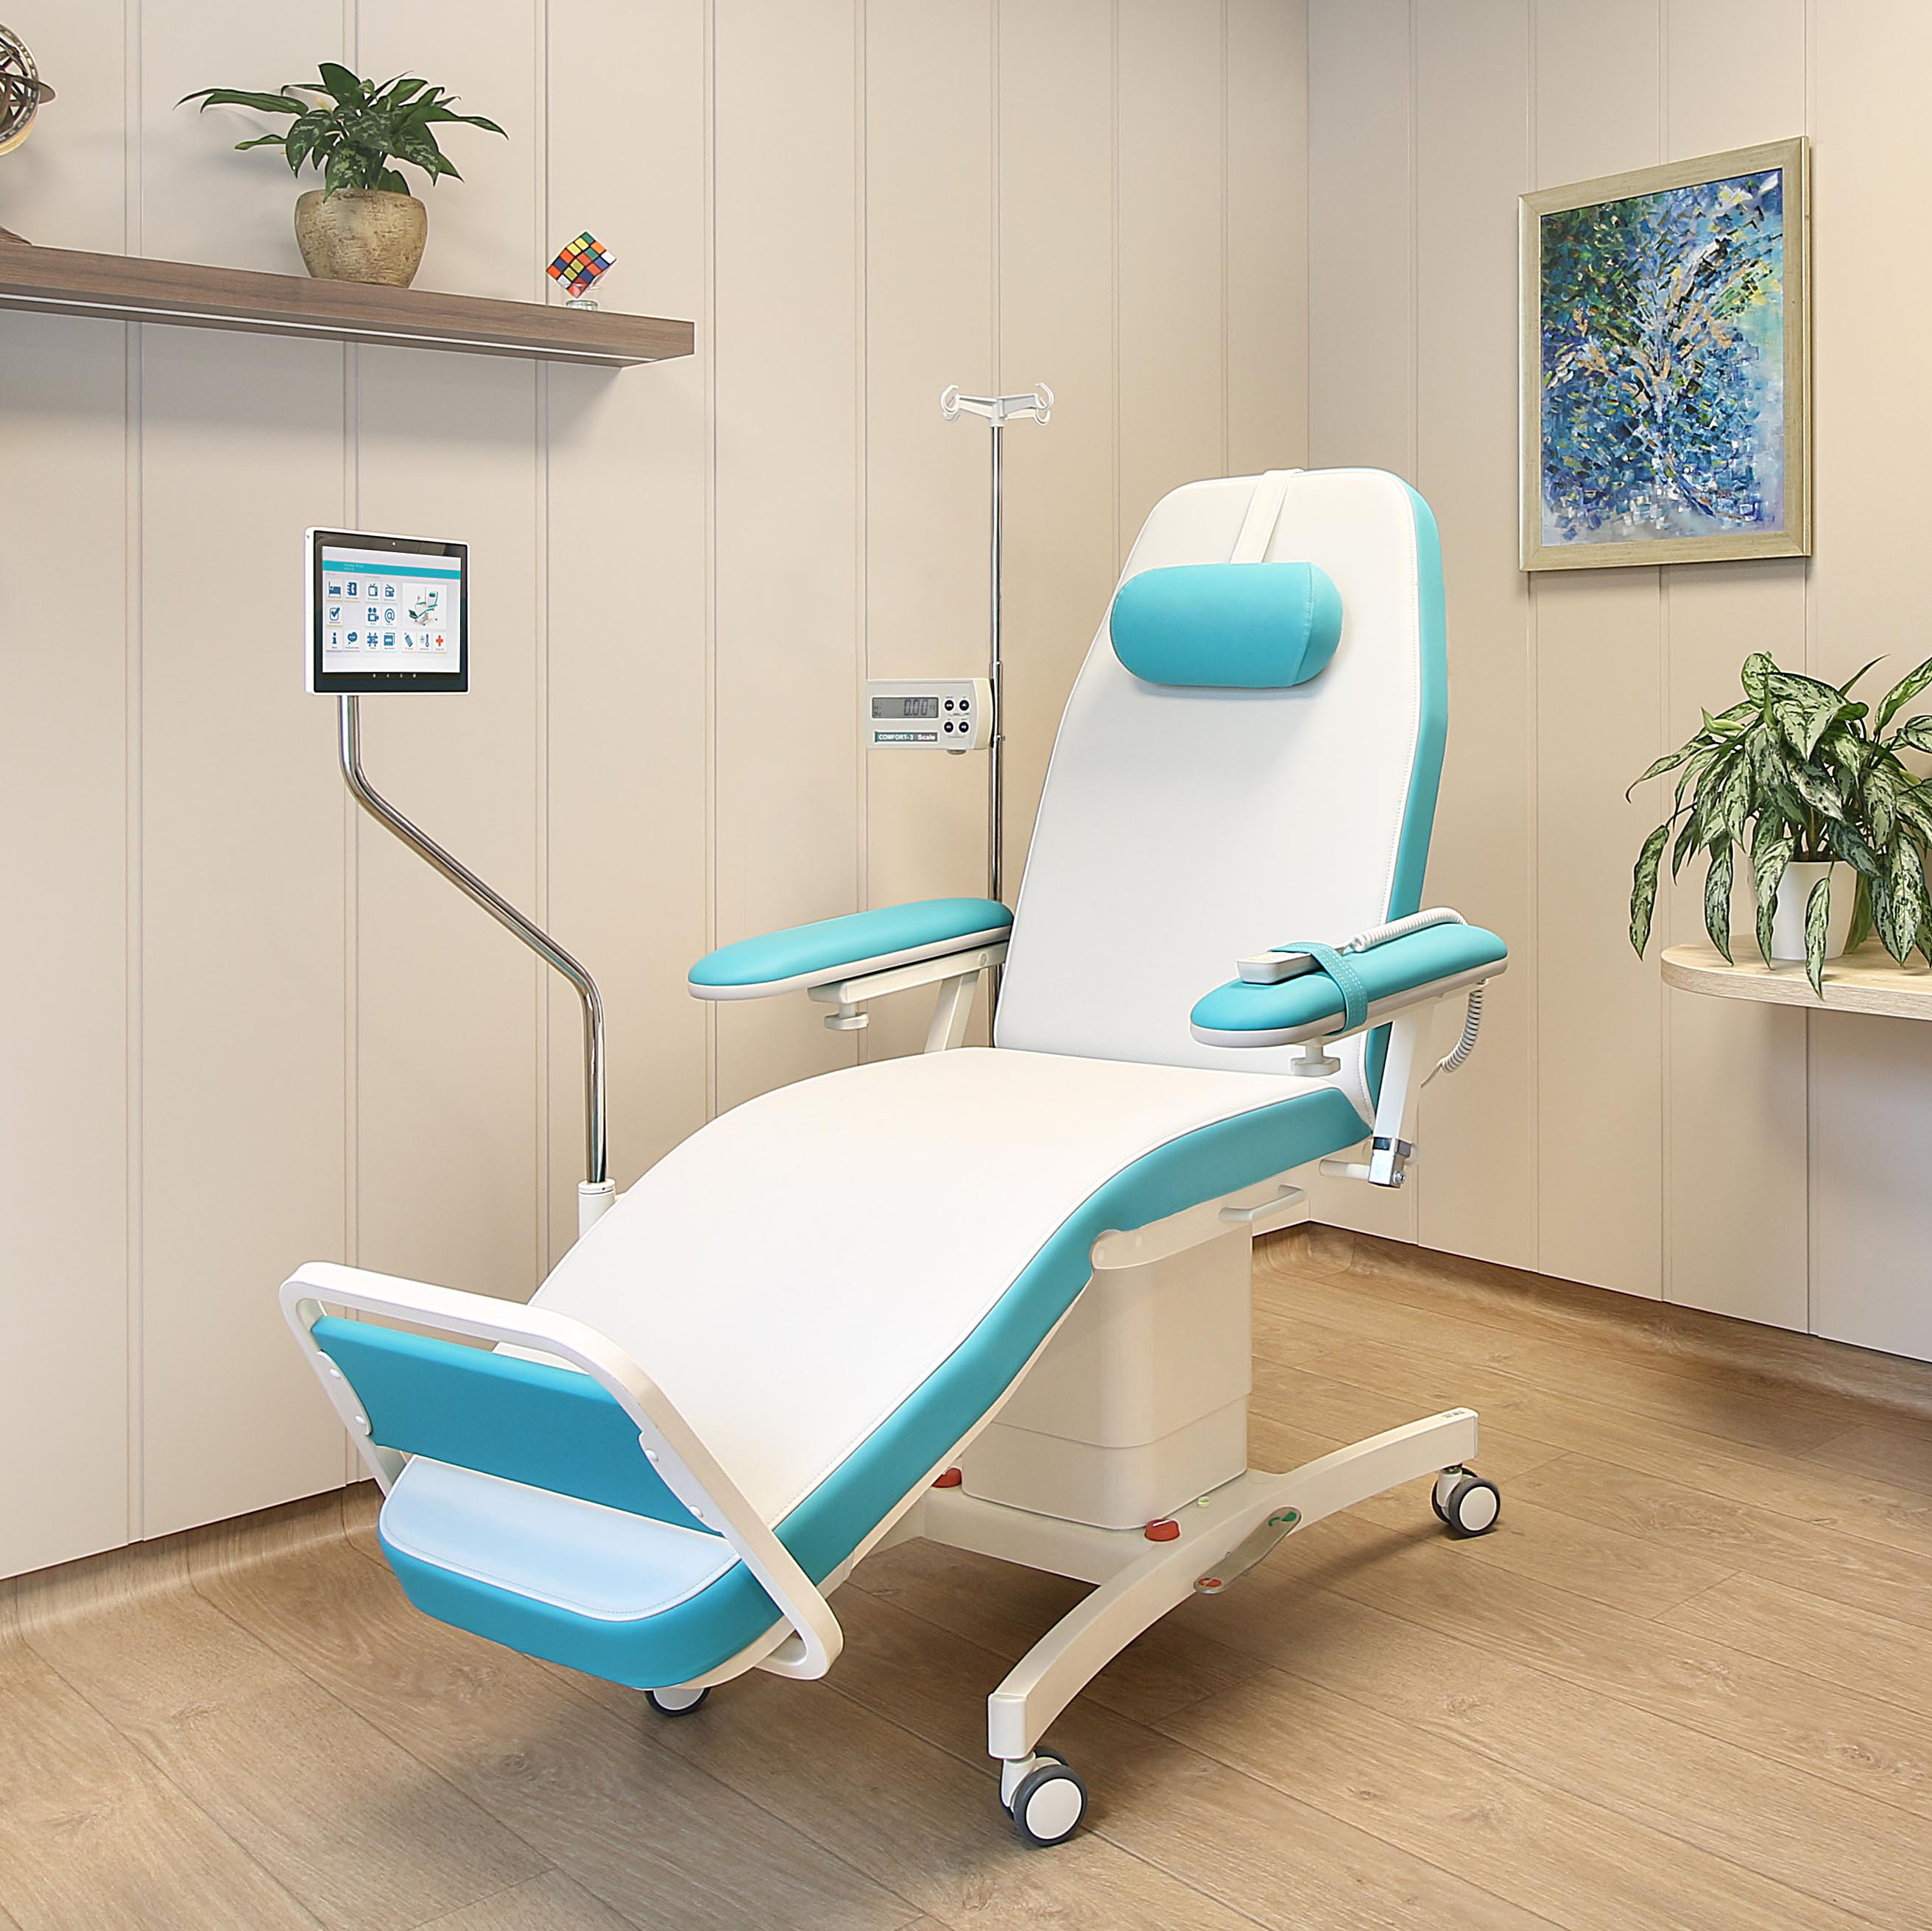 Comfort-3 Scale Therapy-chair in Room